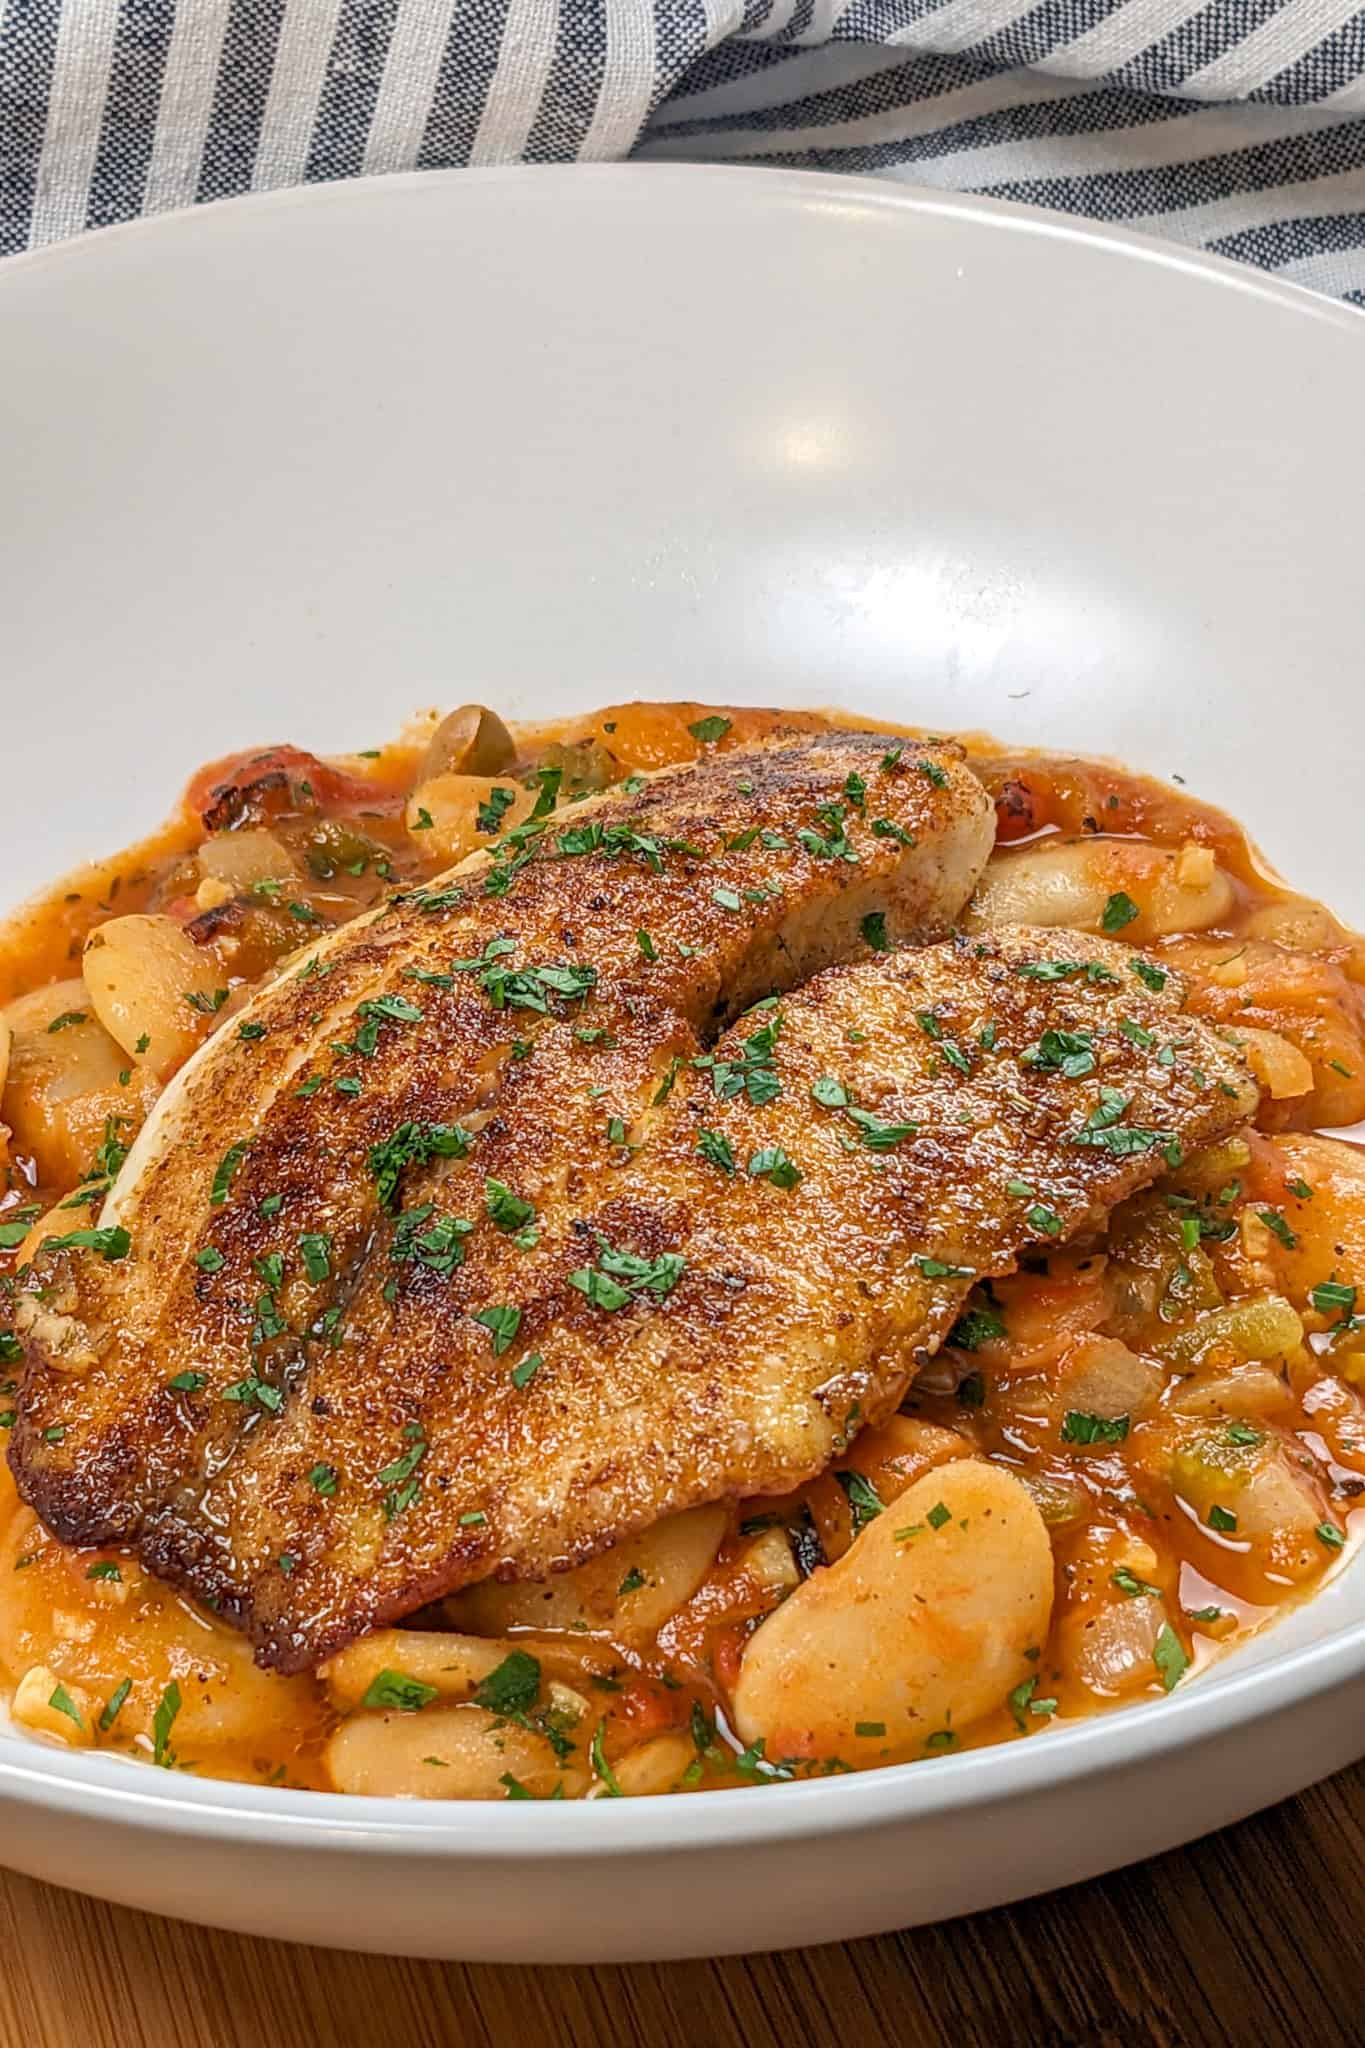 Top side view of Pan-Seared Cajun Spiced Tilapia on White Bean Stew recipe in a wide rim bowl next to a kitchen towel.